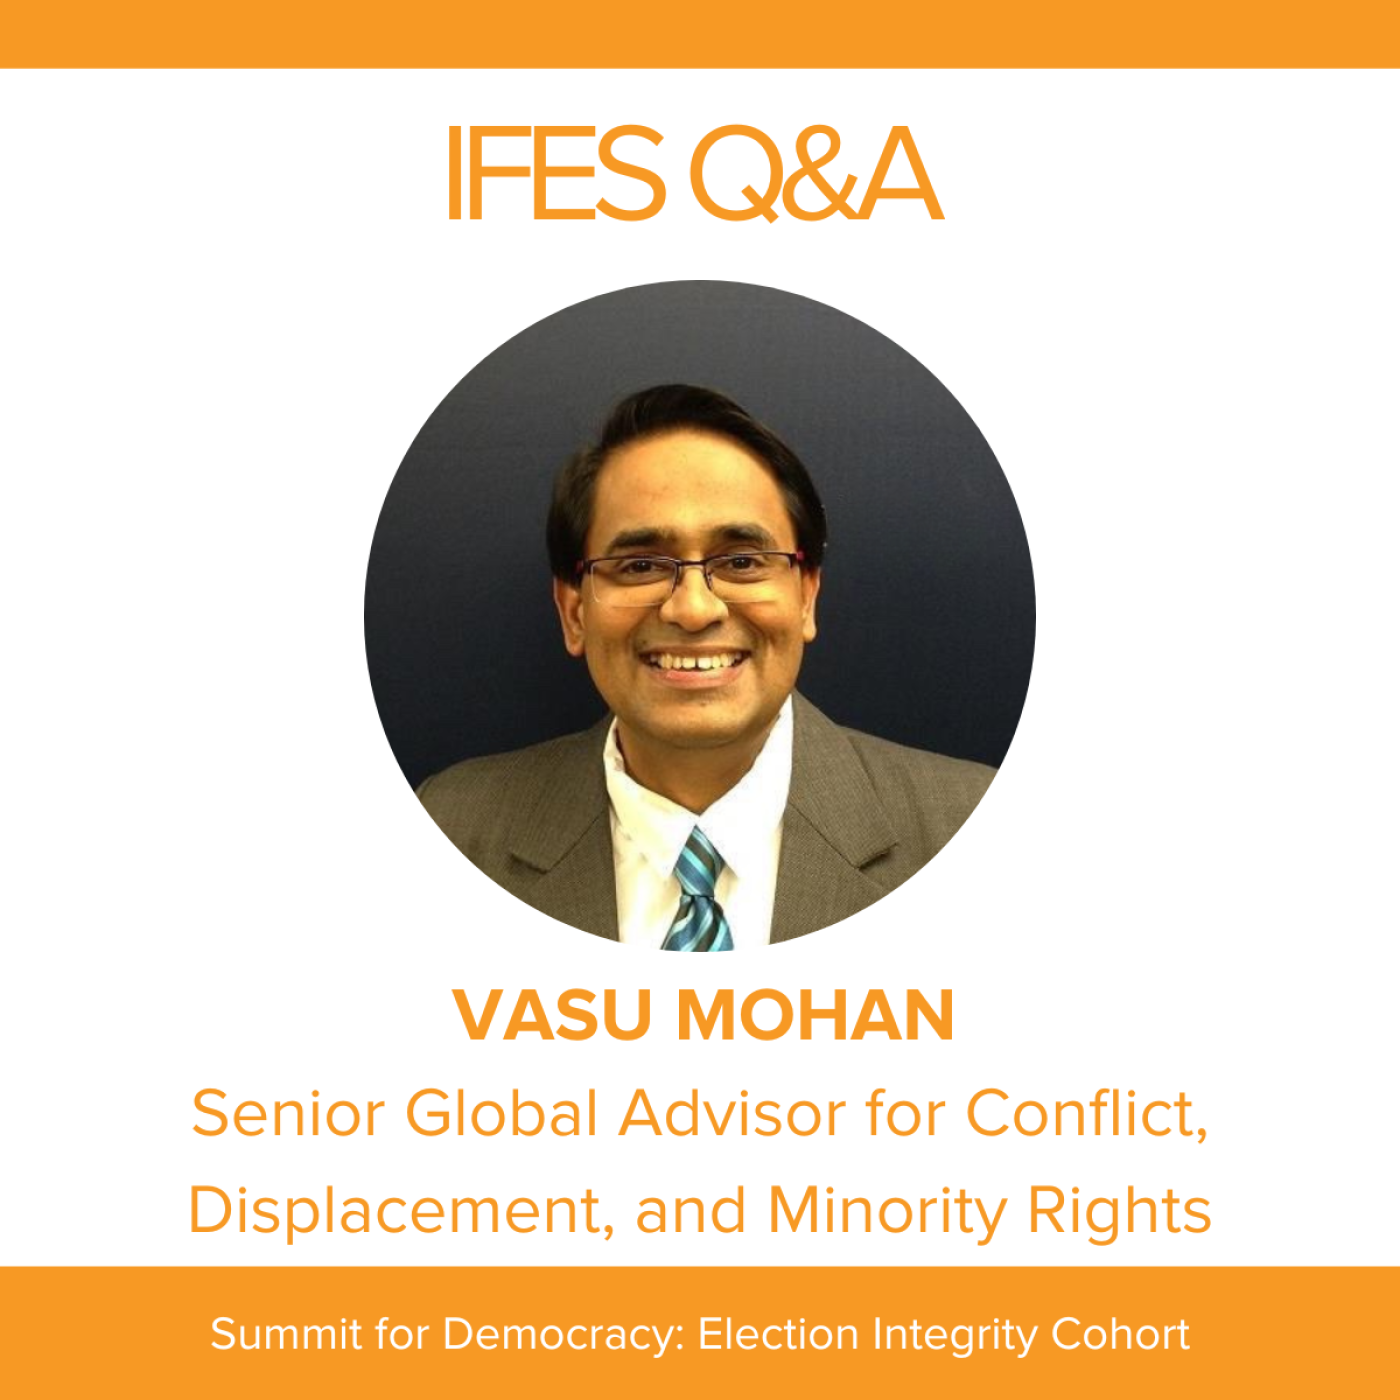 IFES Q&A Vasu Mohan Senior Global Advisor for Conflict, Displacement, and Minority Rights  Summit for Democracy Election Integrity Cohort